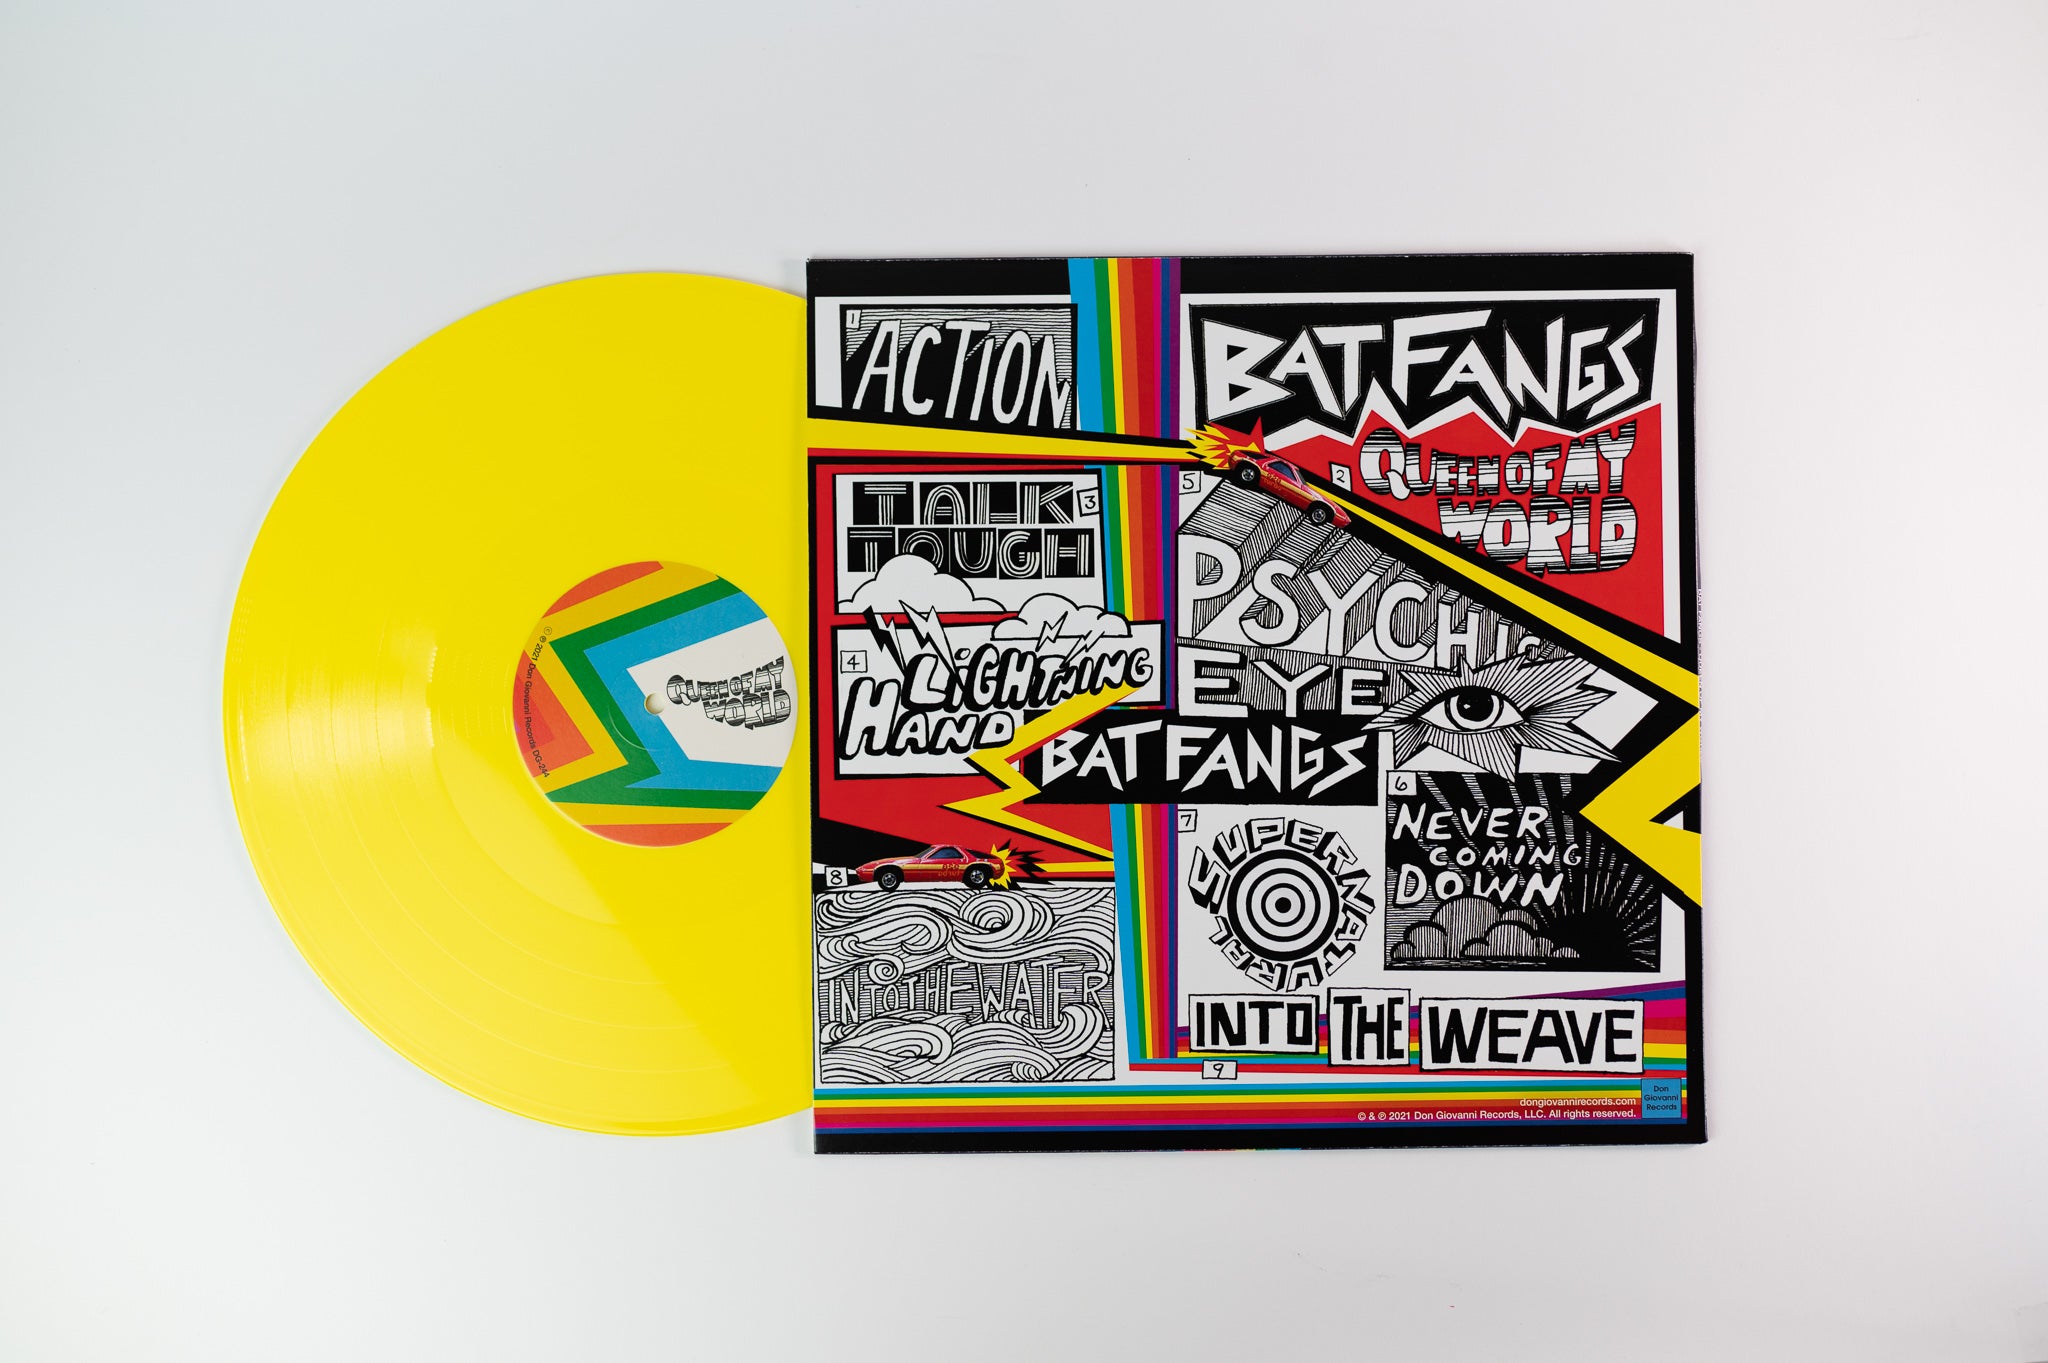 Bat Fangs - Queen Of My World on Don Giovanni Records - Yellow Vinyl